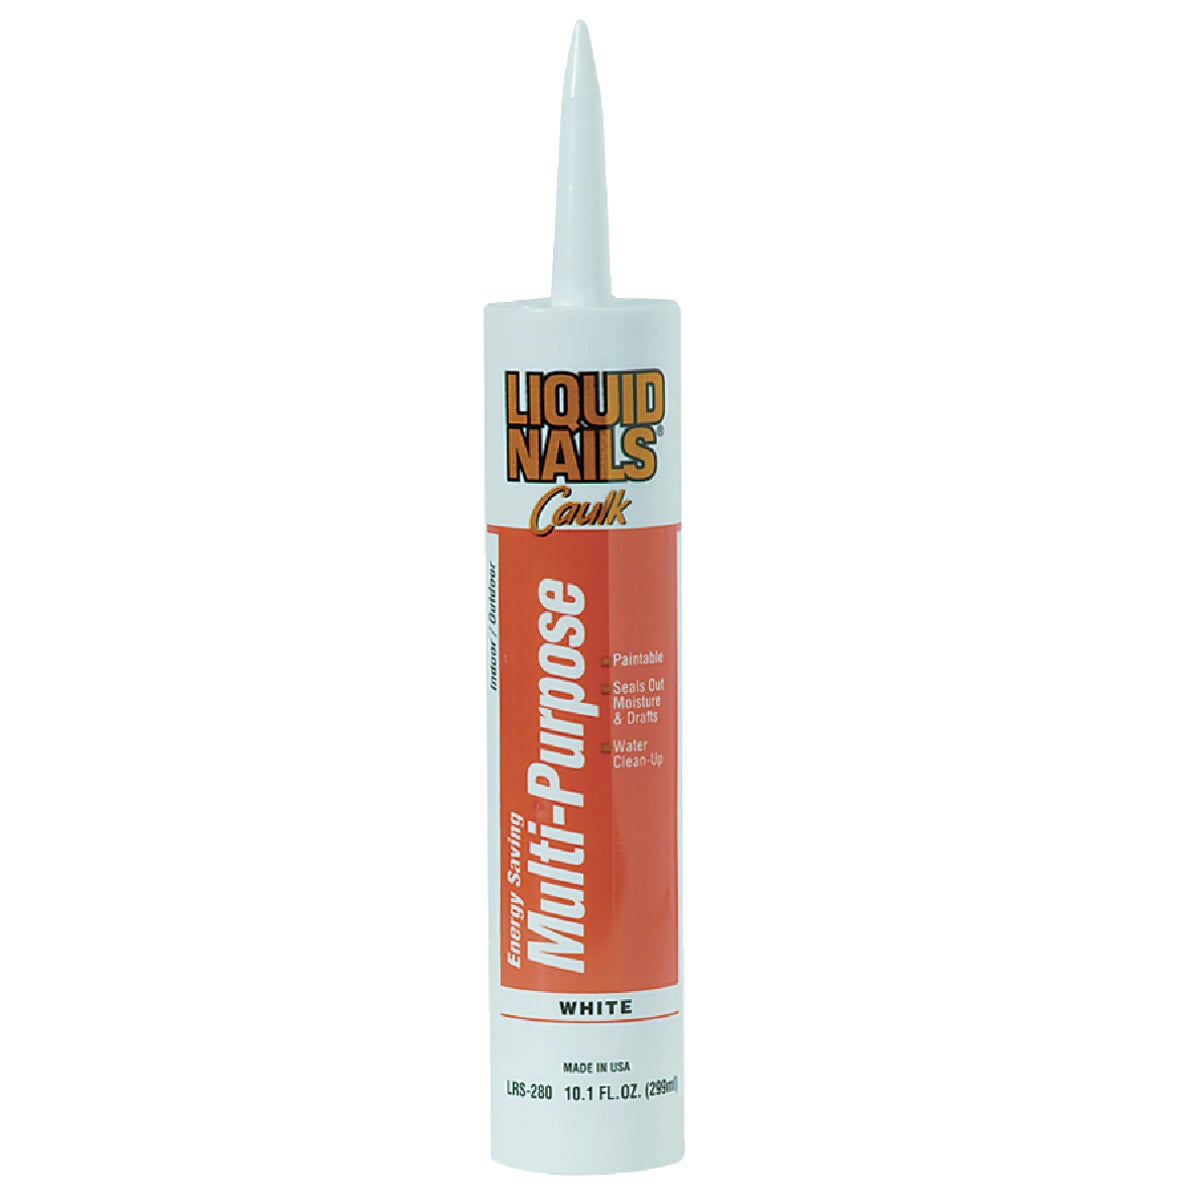 Item 790683, A paintable, low odor, latex-based caulking compound that offers easy 